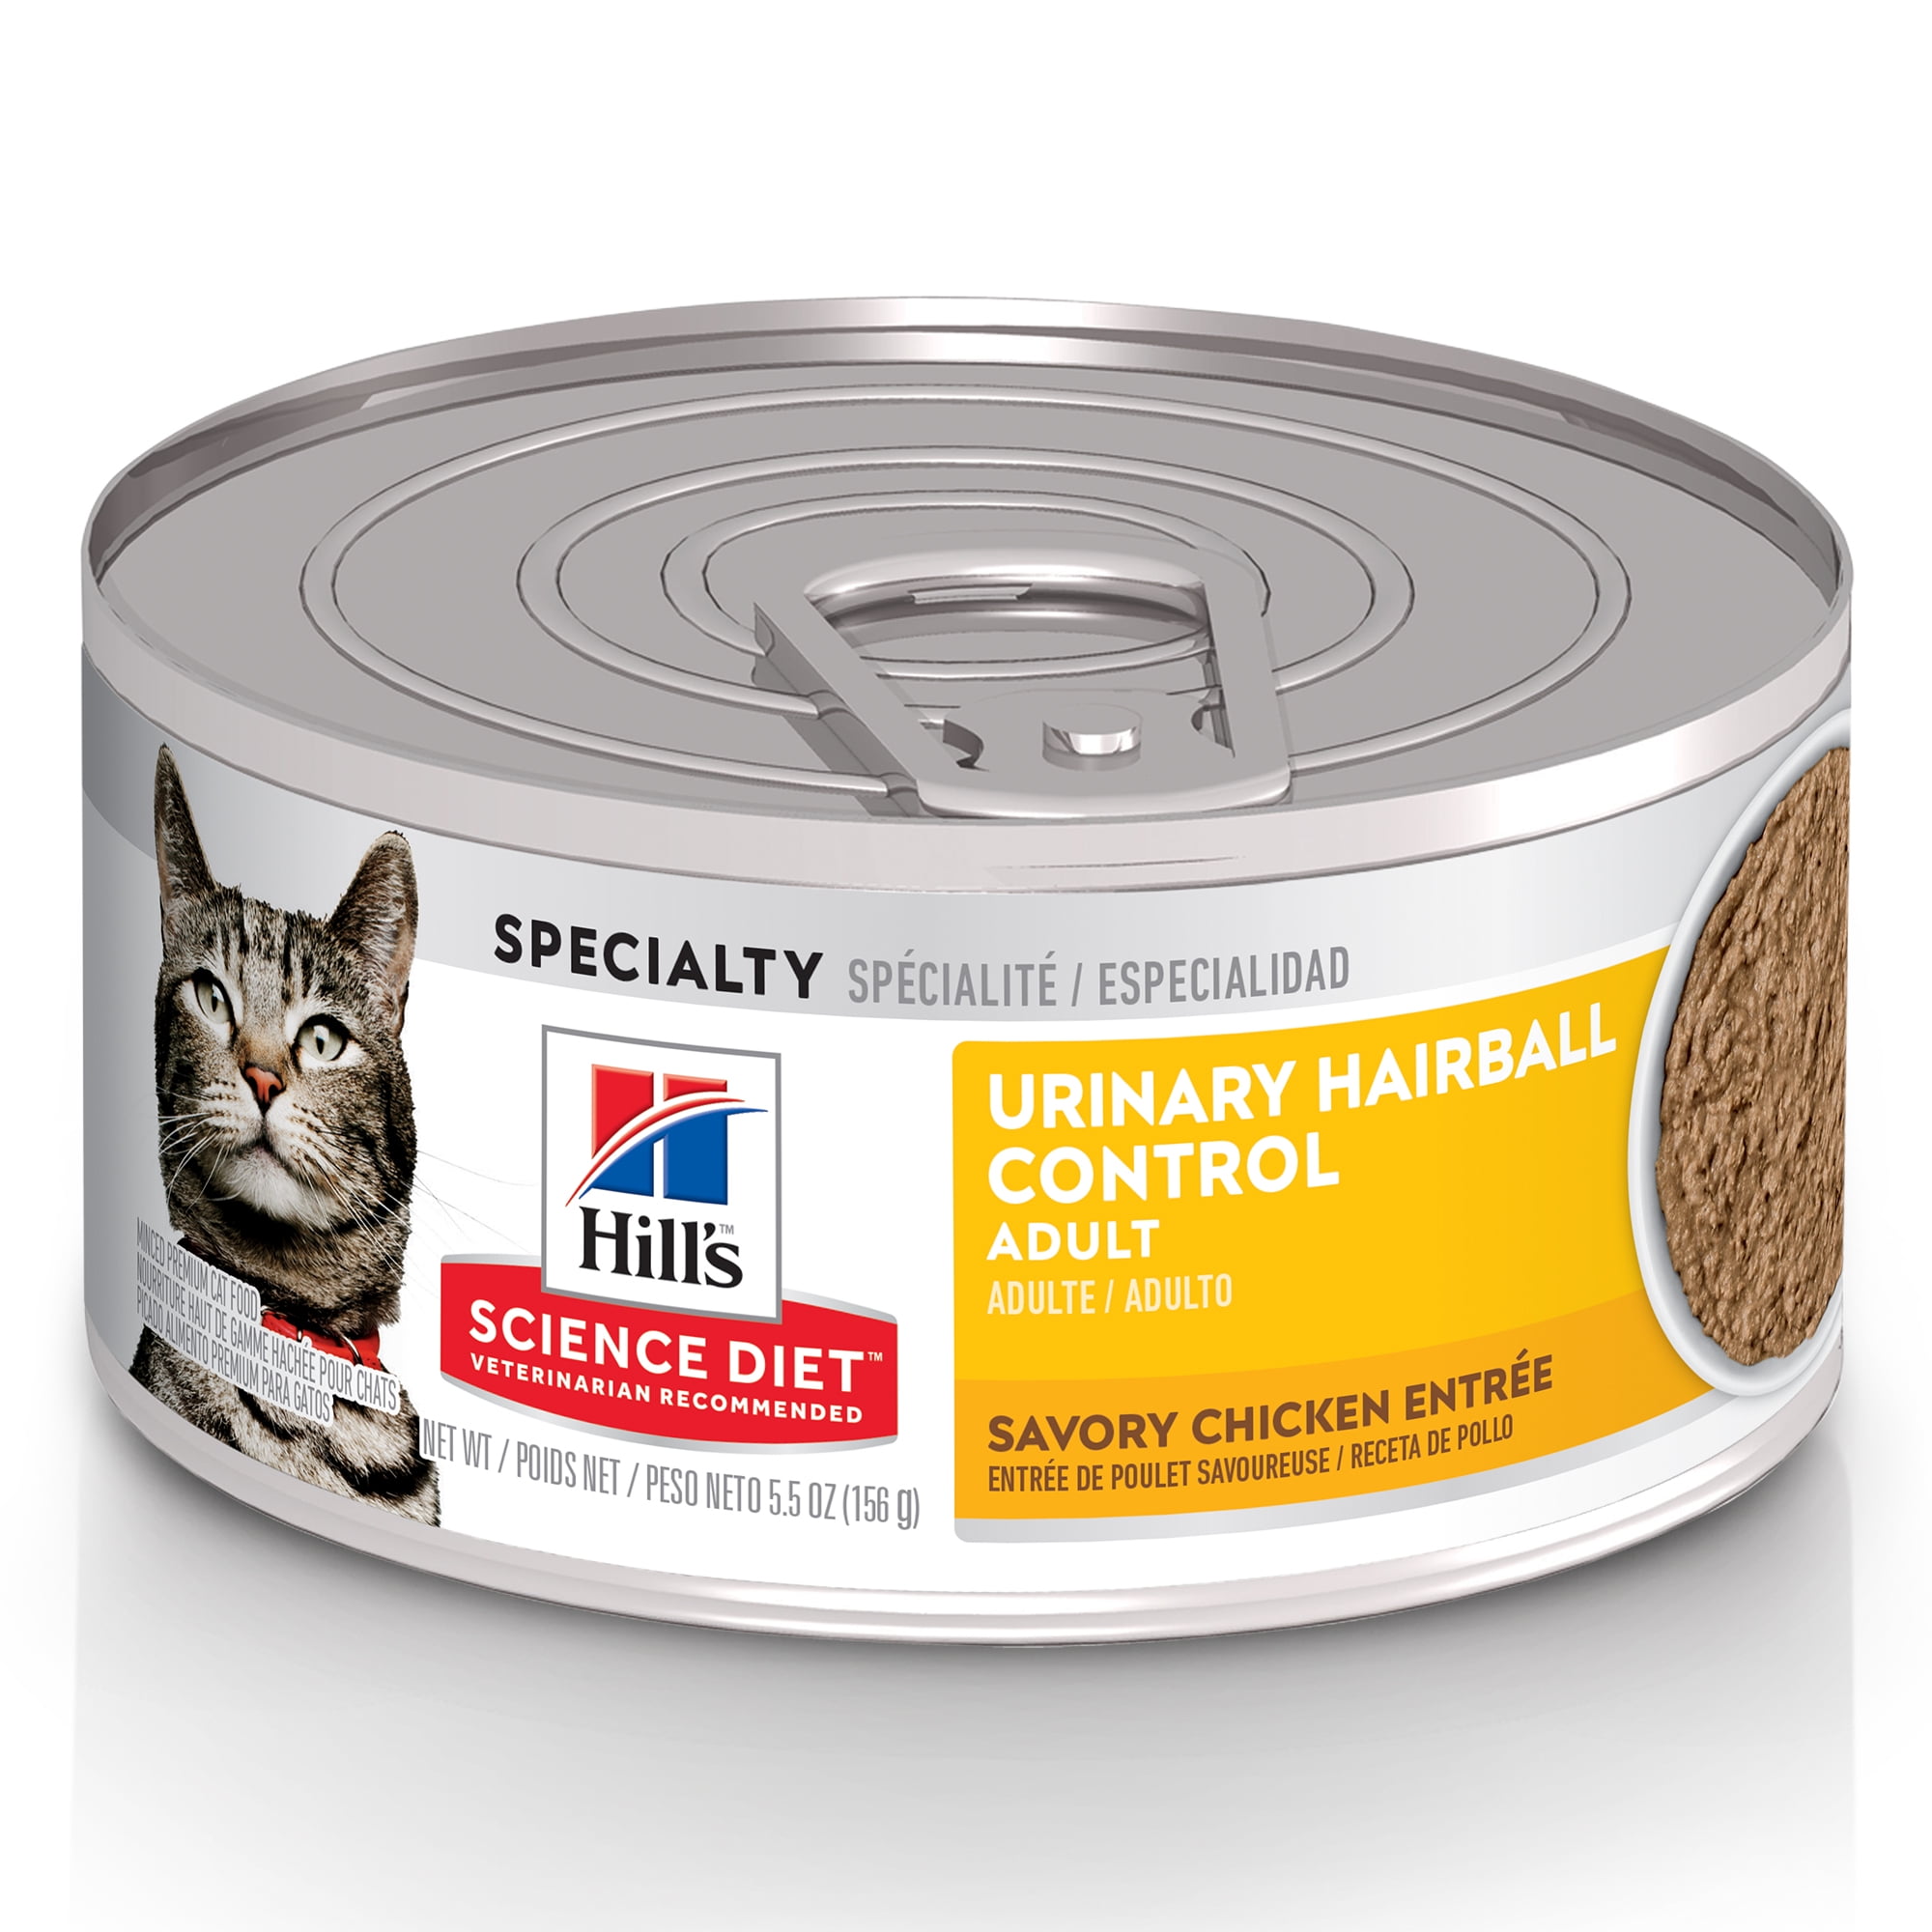 Hill's Science Diet Adult Urinary & Hairball Control Canned Cat Food